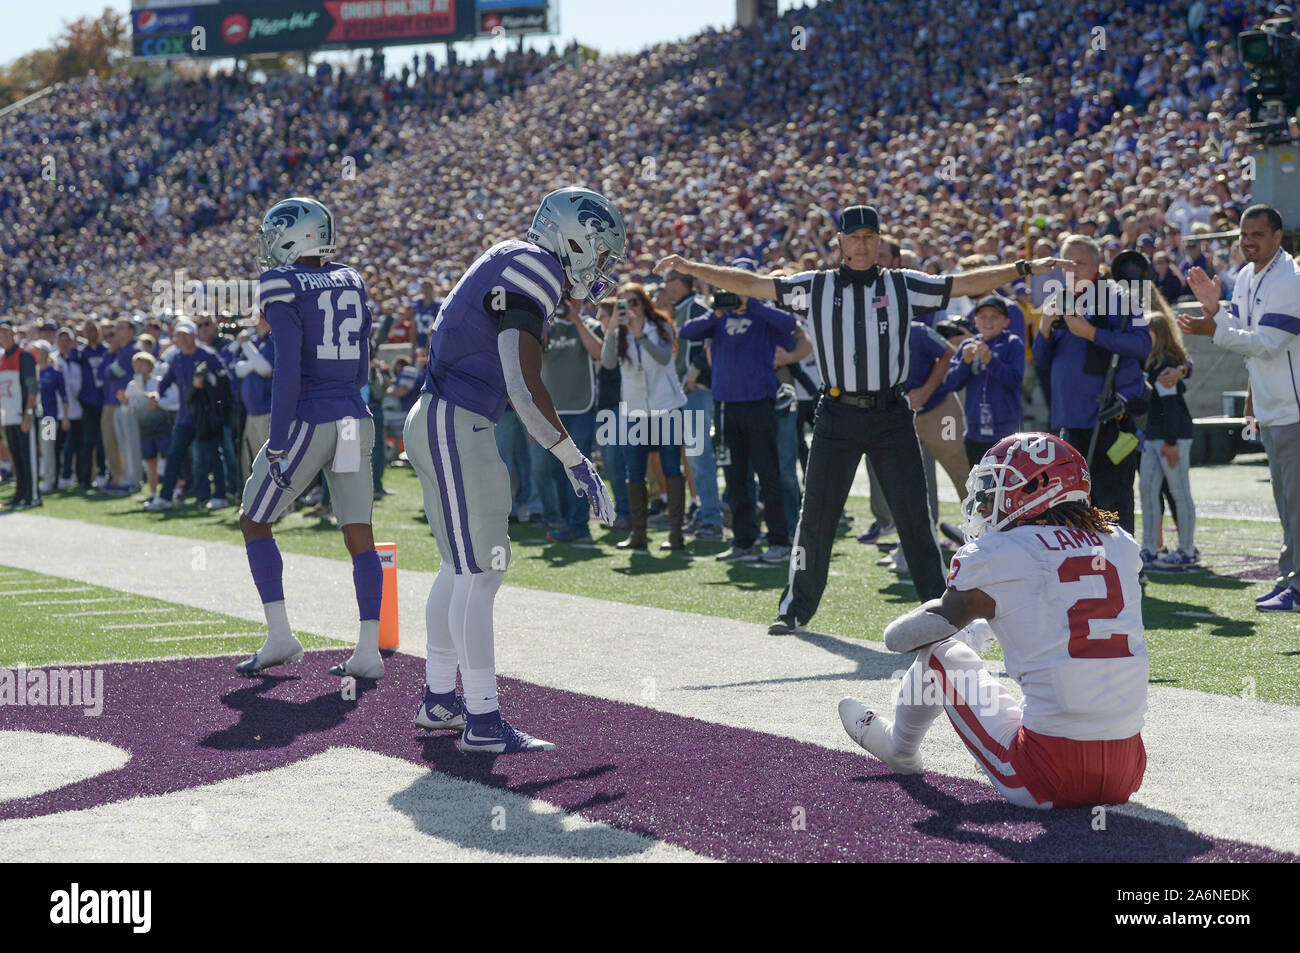 Manhattan, Kansas, USA. 26th Oct, 2019. Kansas State Wildcats defensive back AJ Parker (12) taunts Oklahoma Sooners wide receiver CeeDee Lamb (2) after Parker breaks up a touchdown pass intended for during the NCAA Football Game between the Oklahoma Sooners and the Kansas State Wildcats at Bill Snyder Family Stadium in Manhattan, Kansas. Kendall Shaw/CSM/Alamy Live News Stock Photo